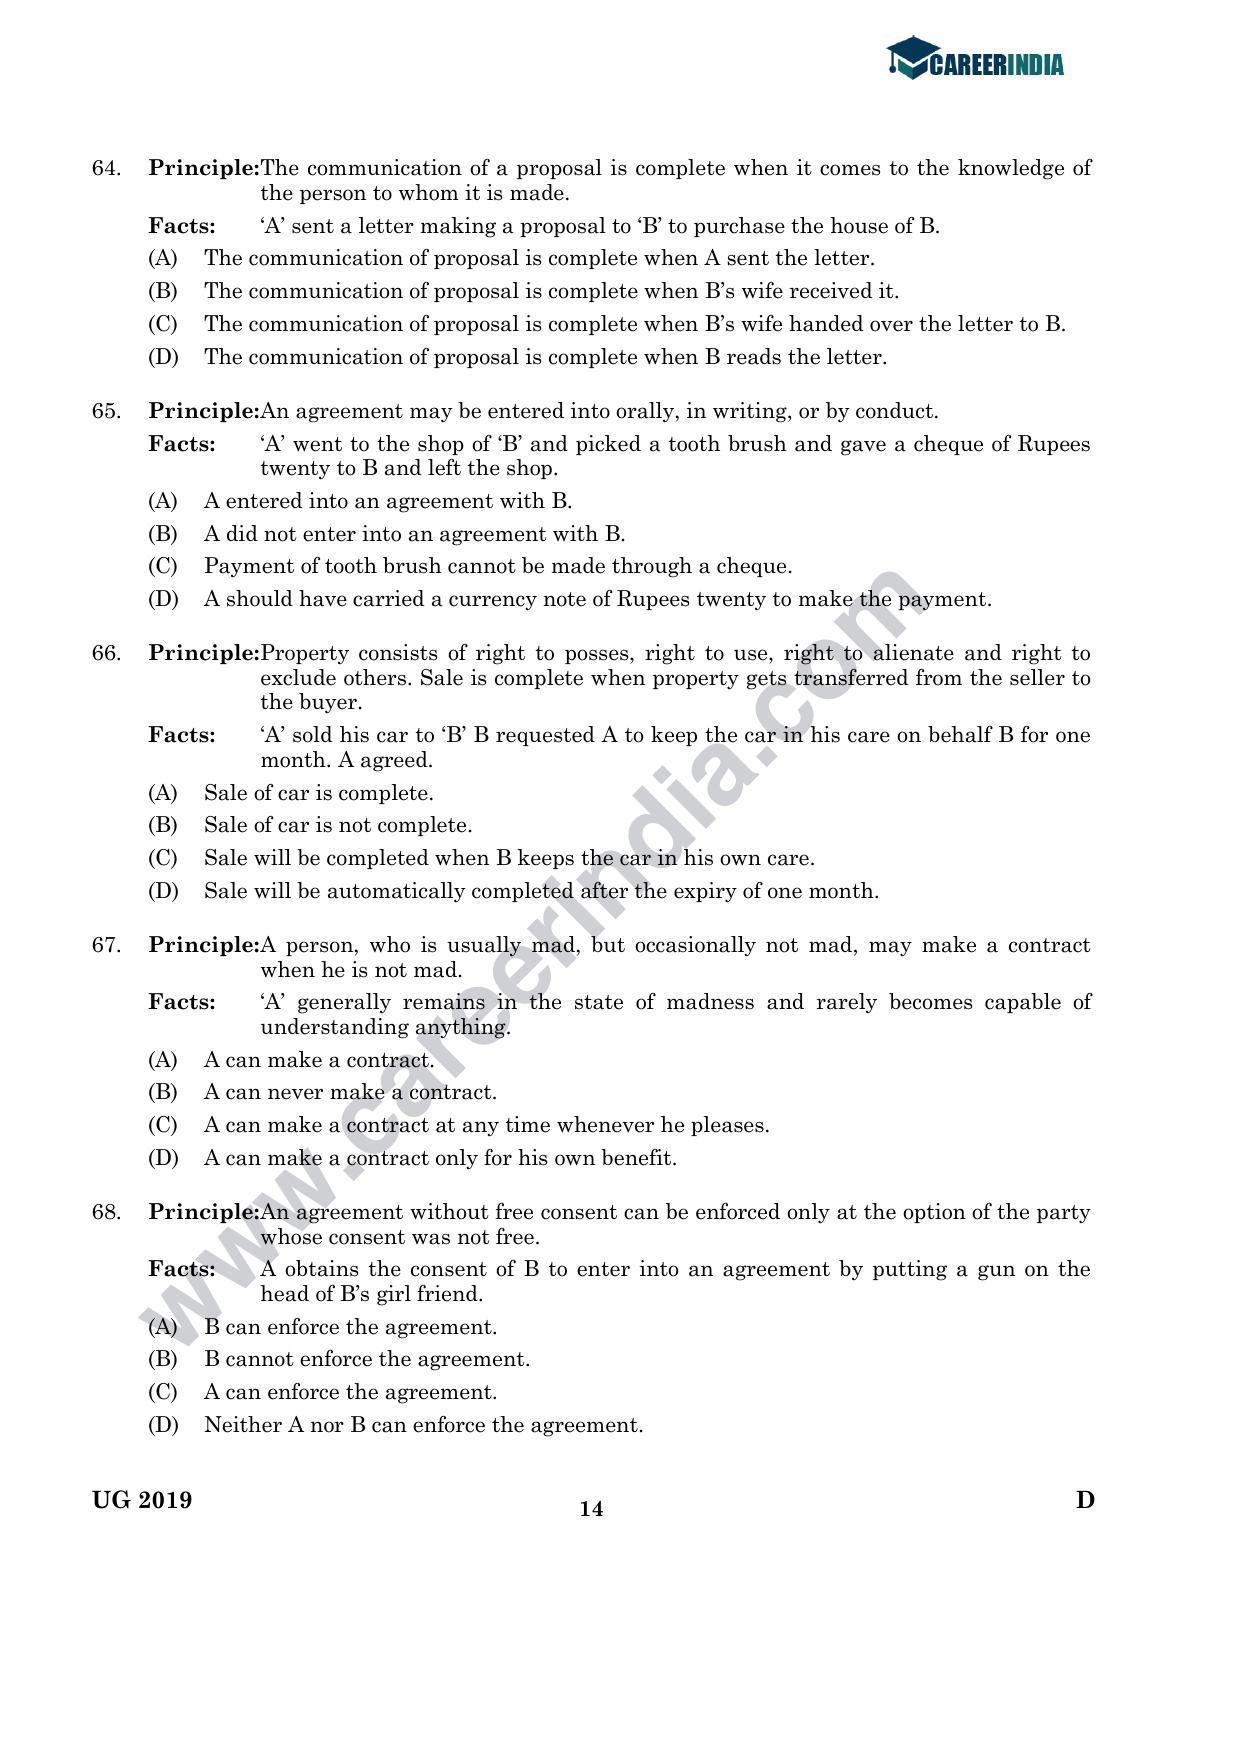 CLAT 2019 UG Logical-Reasoning Question Paper - Page 13